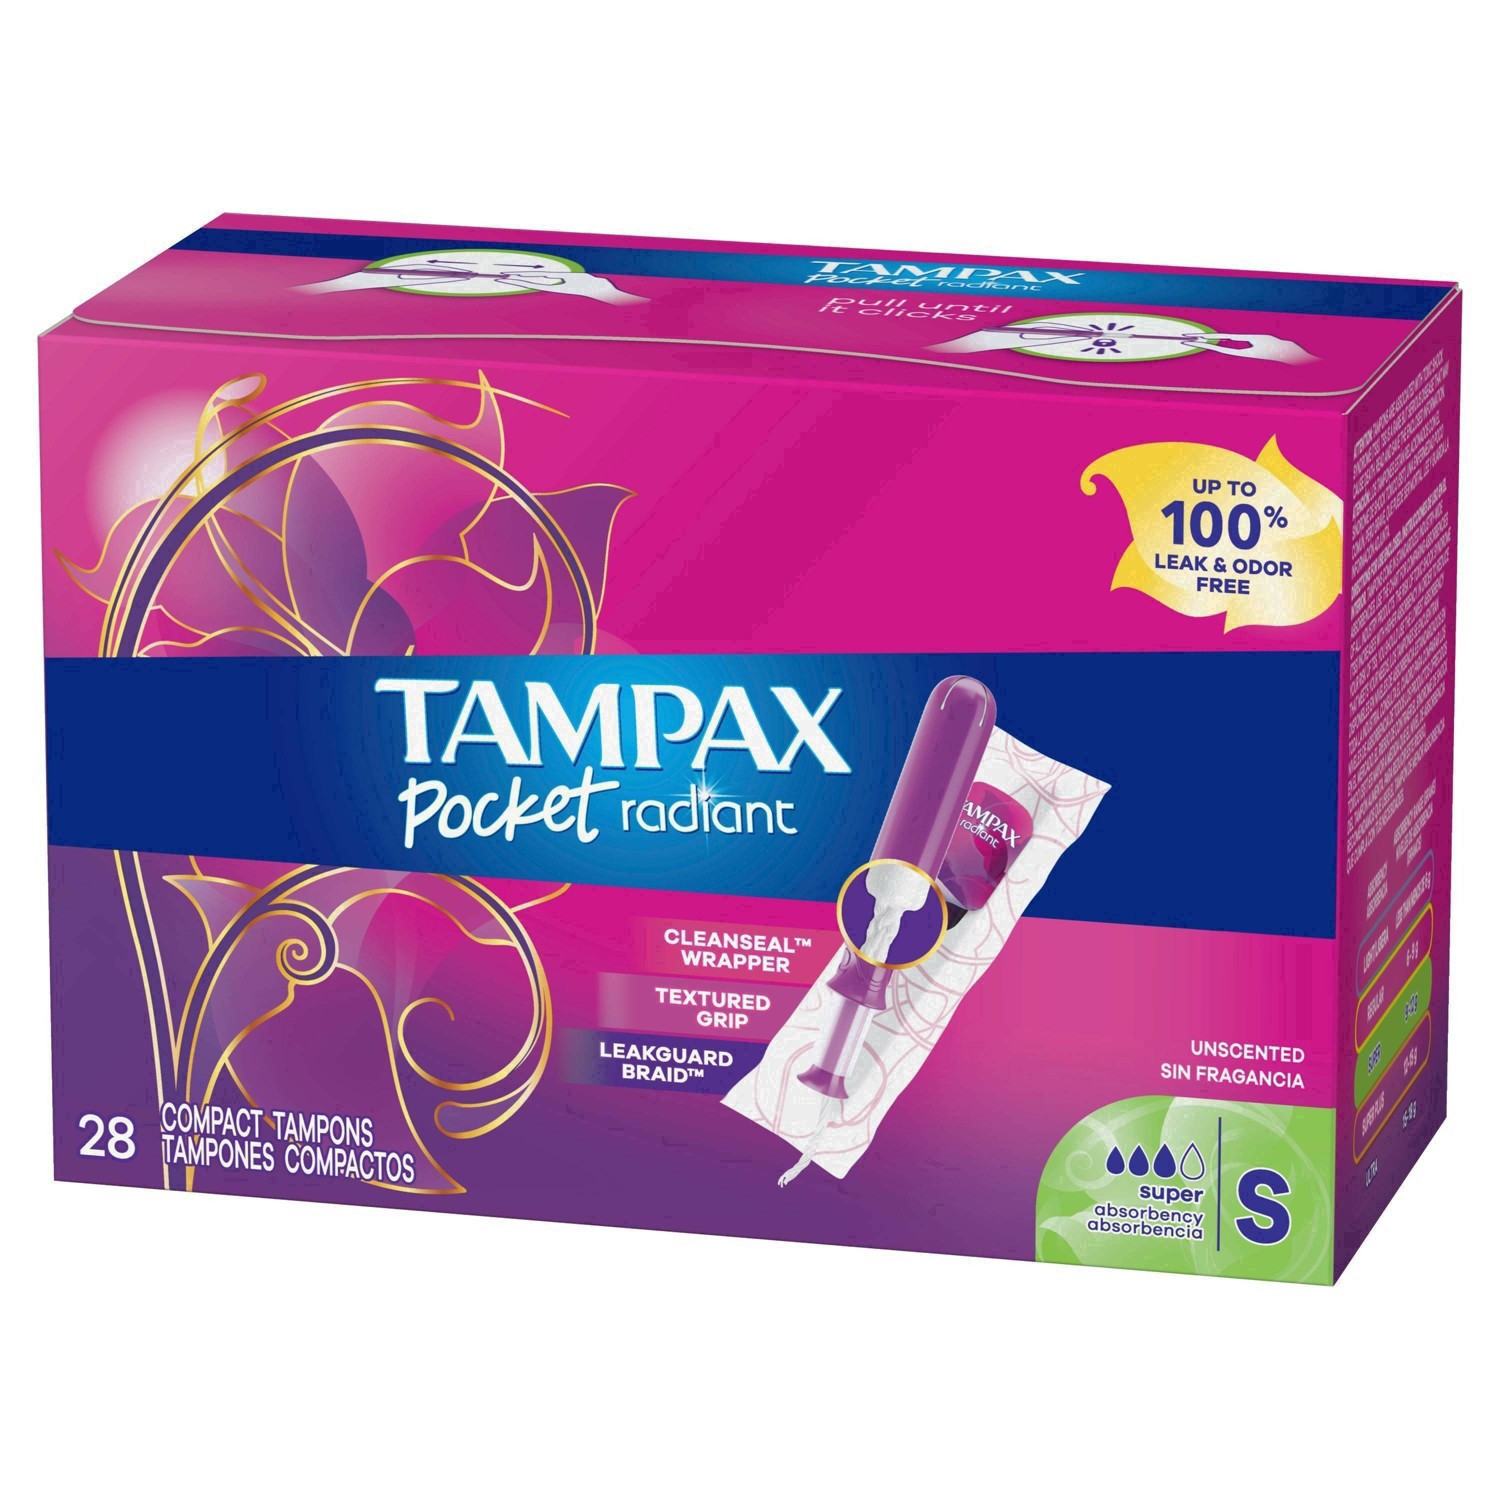 slide 47 of 94, Tampax Pocket Radiant Compact Plastic Tampons, With LeakGuard Braid, Super Absorbency, Unscented, 28 Count, 28 ct